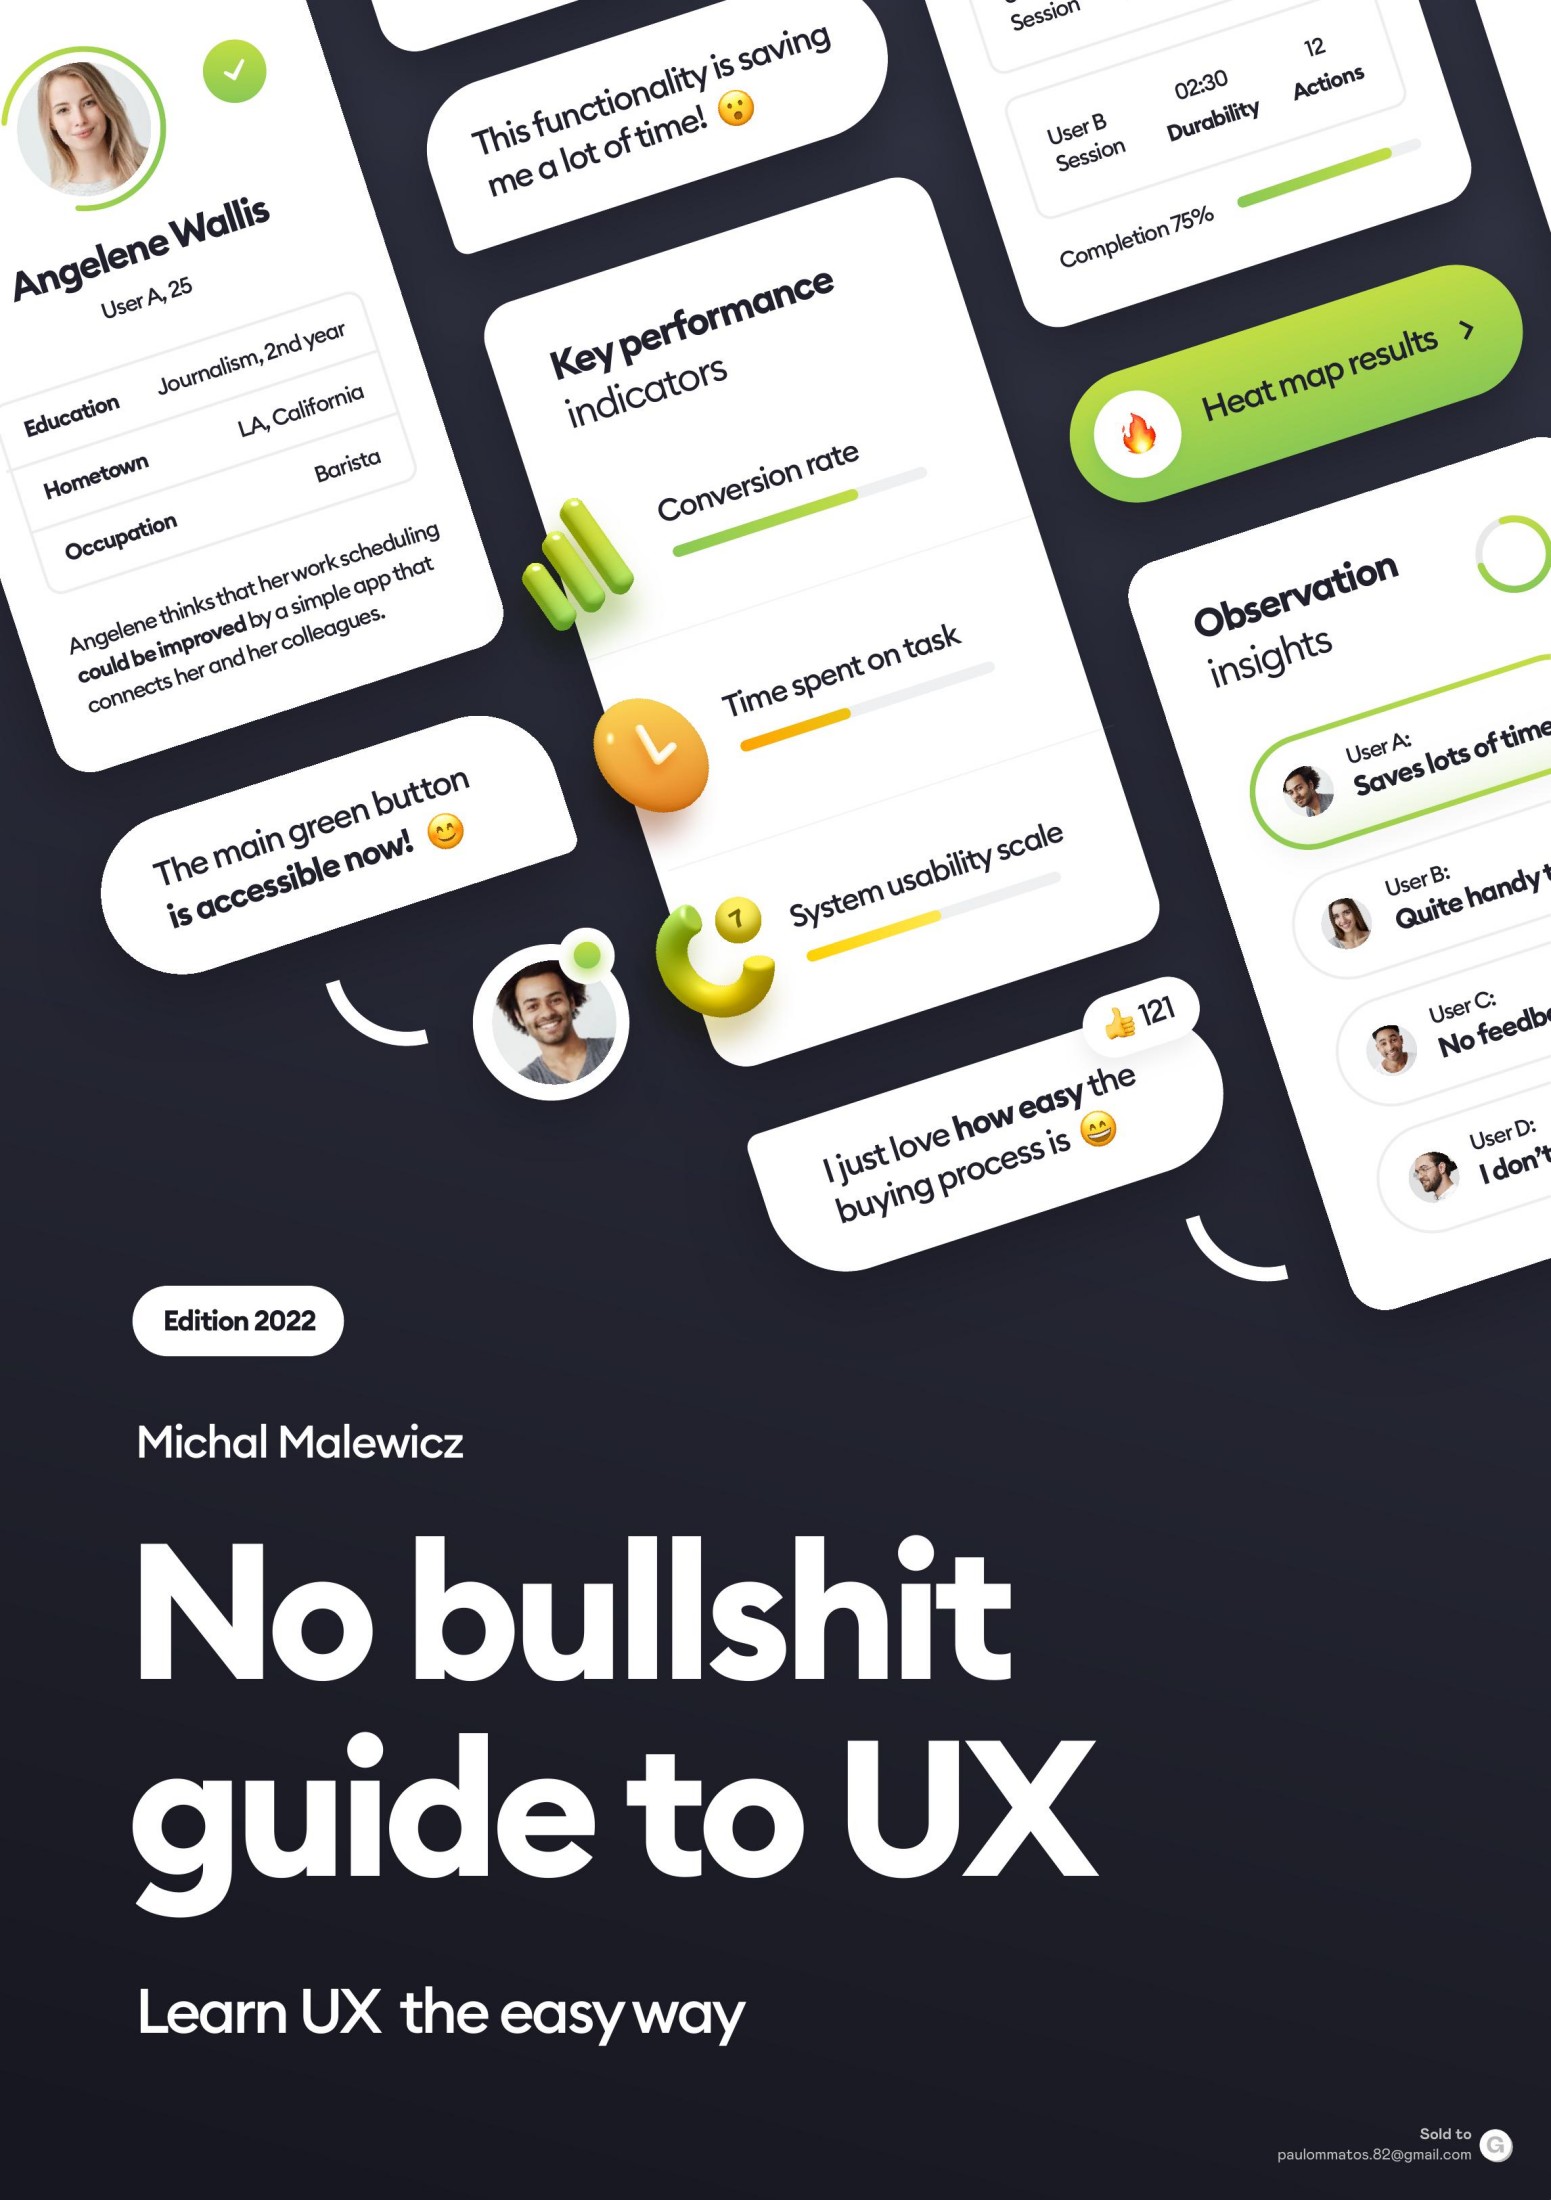 No bullshit guide to UX - Learn UX the easy way